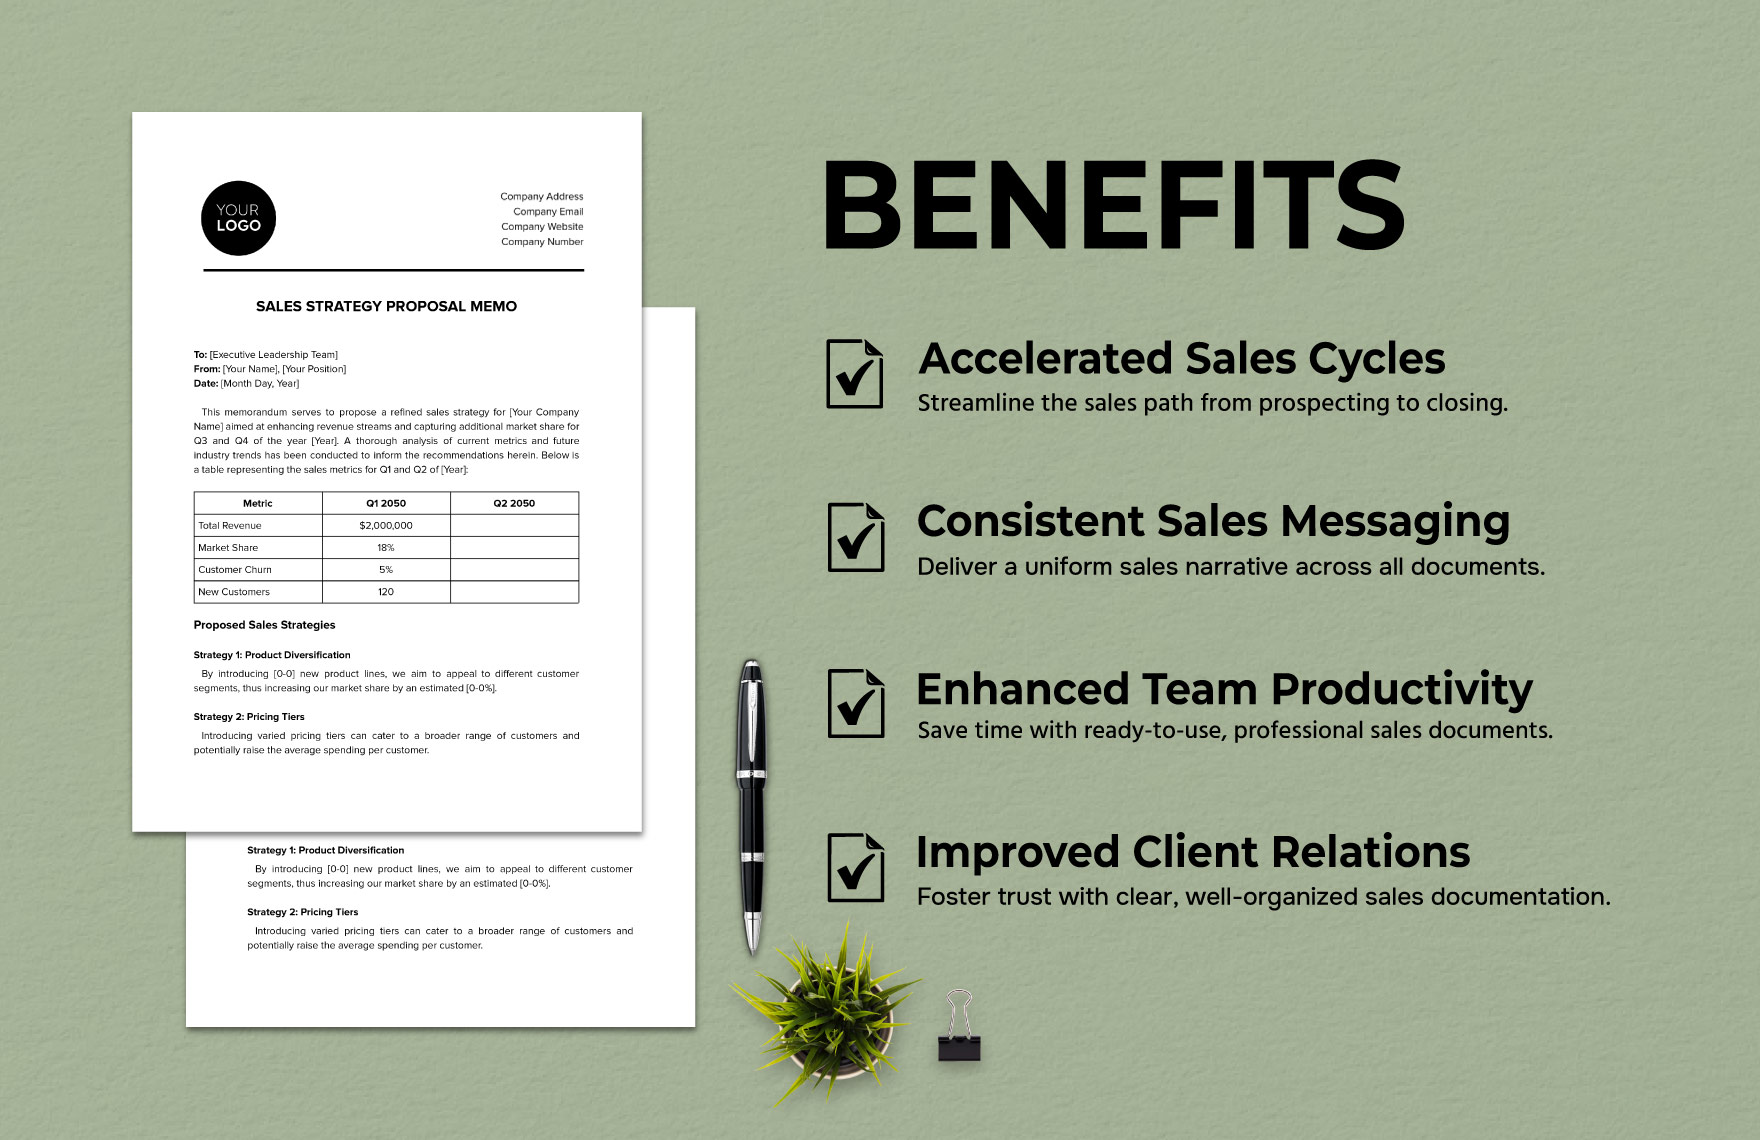 Sales Strategy Proposal Memo Template